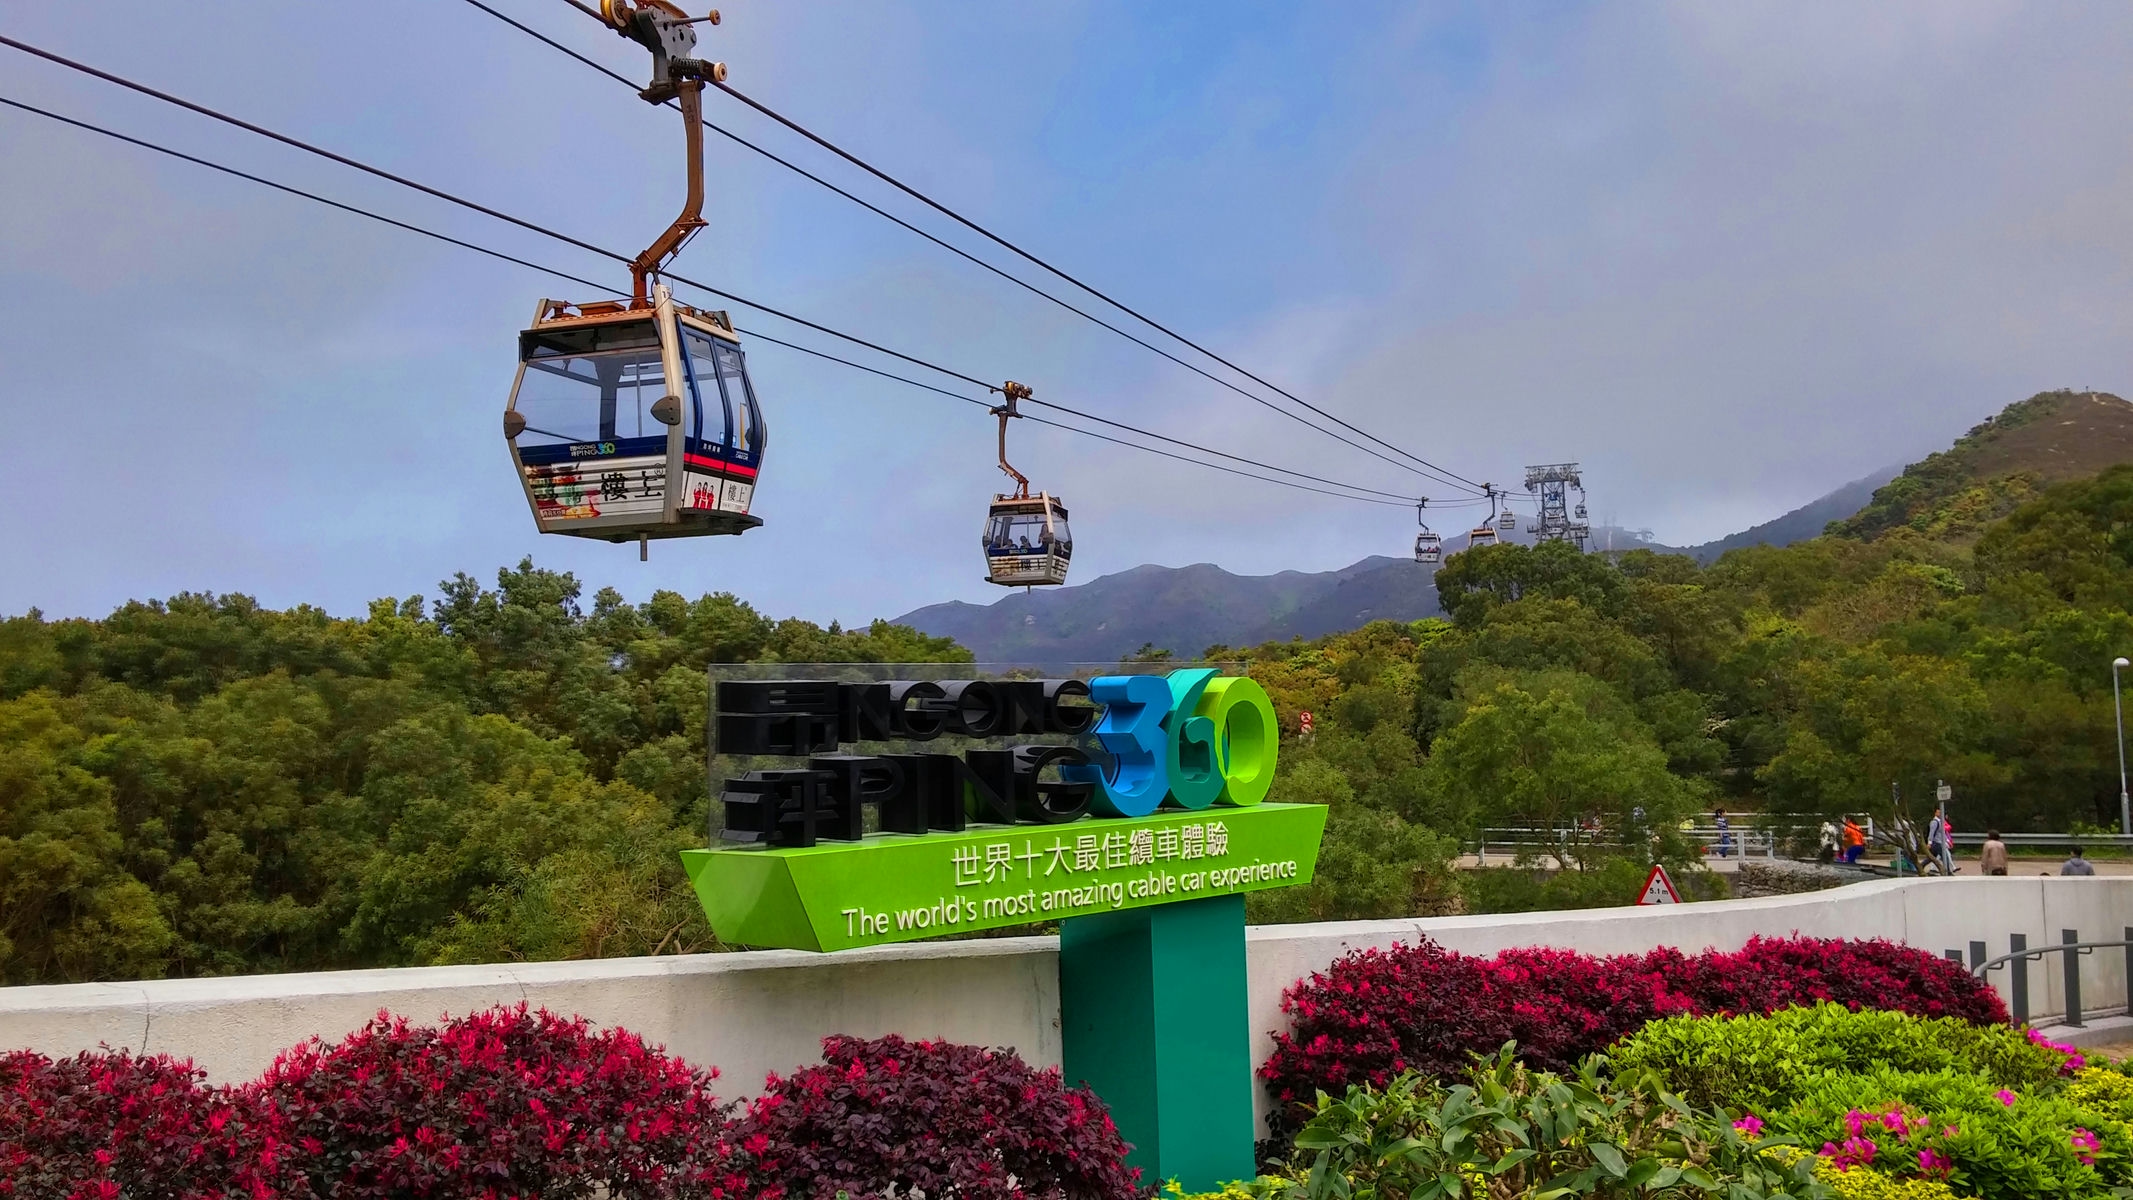 Ngong Ping 360 Cable Car service returns on 5 June 2017